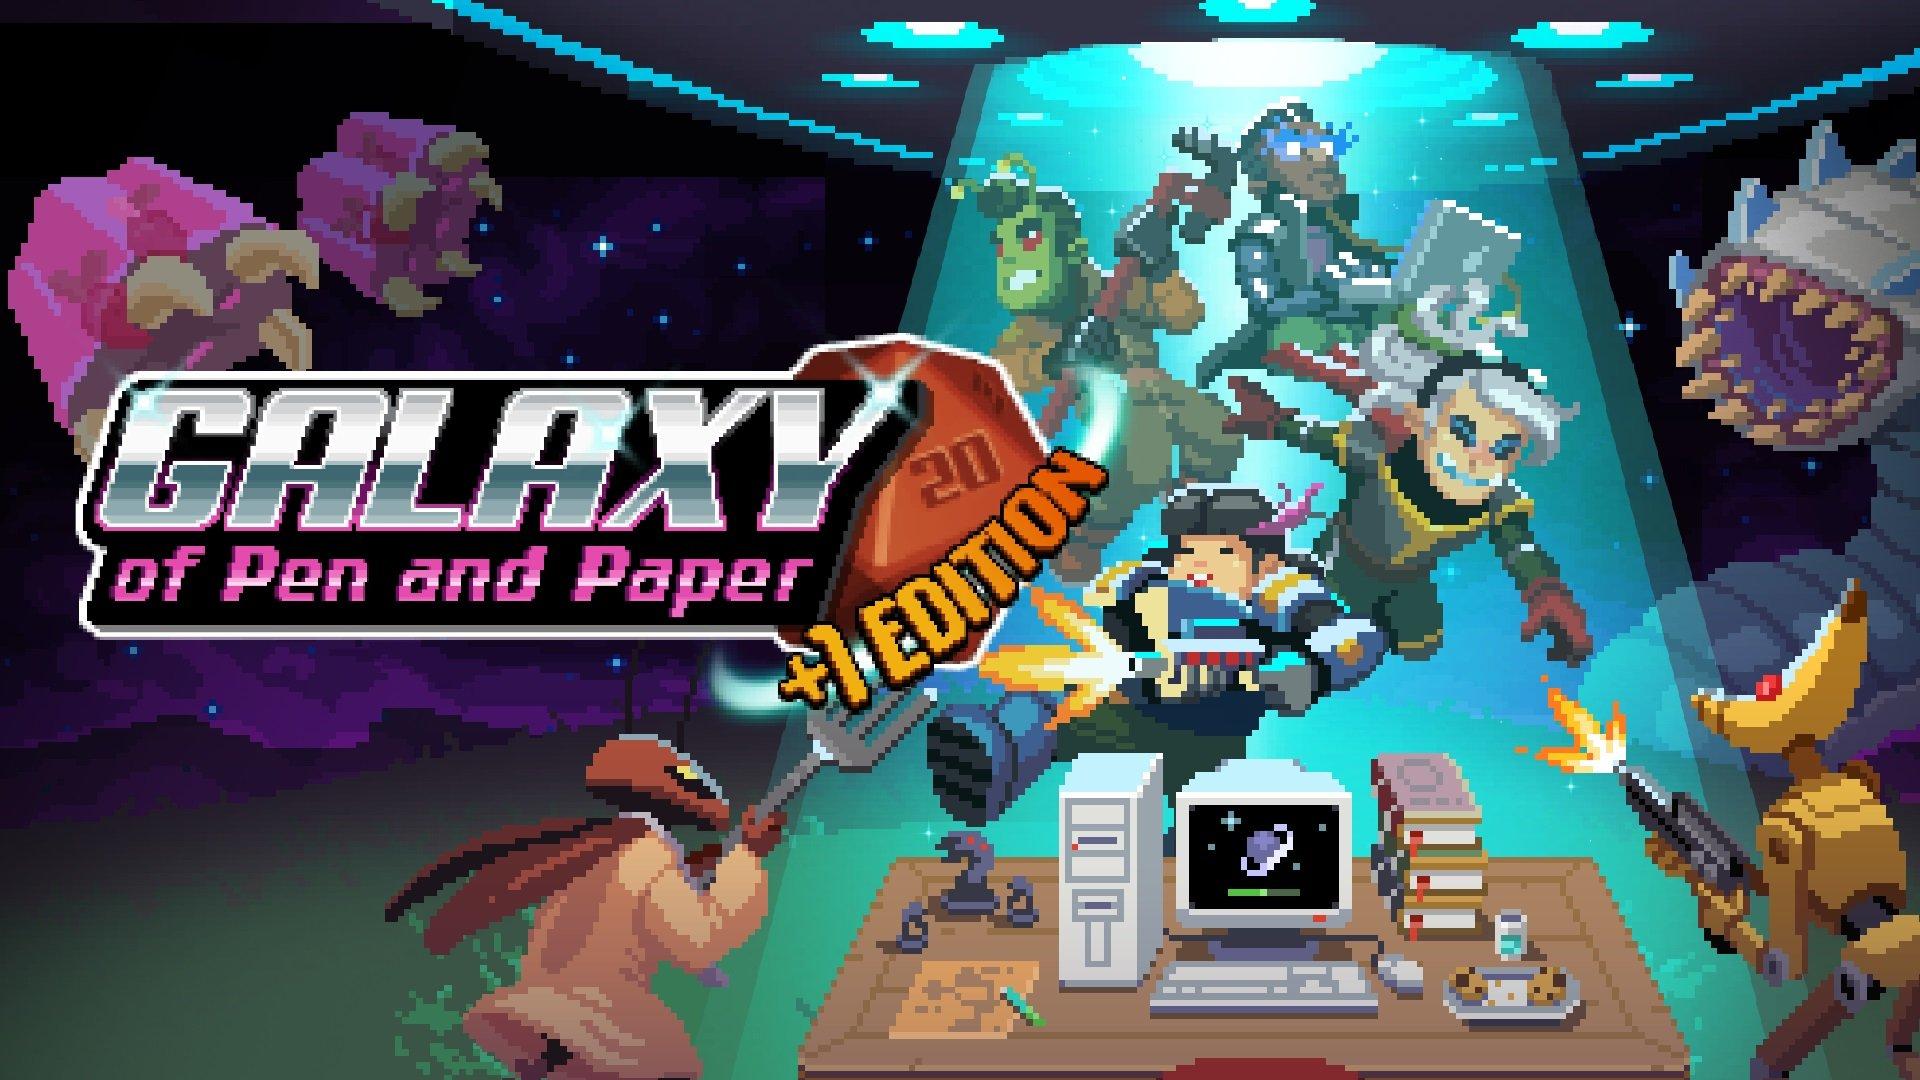 Galaxy of Pen and Paper Plus 1 Edition - Nintendo Switch (Plug In Digital) for Nintendo Switch, Digital - GameStop